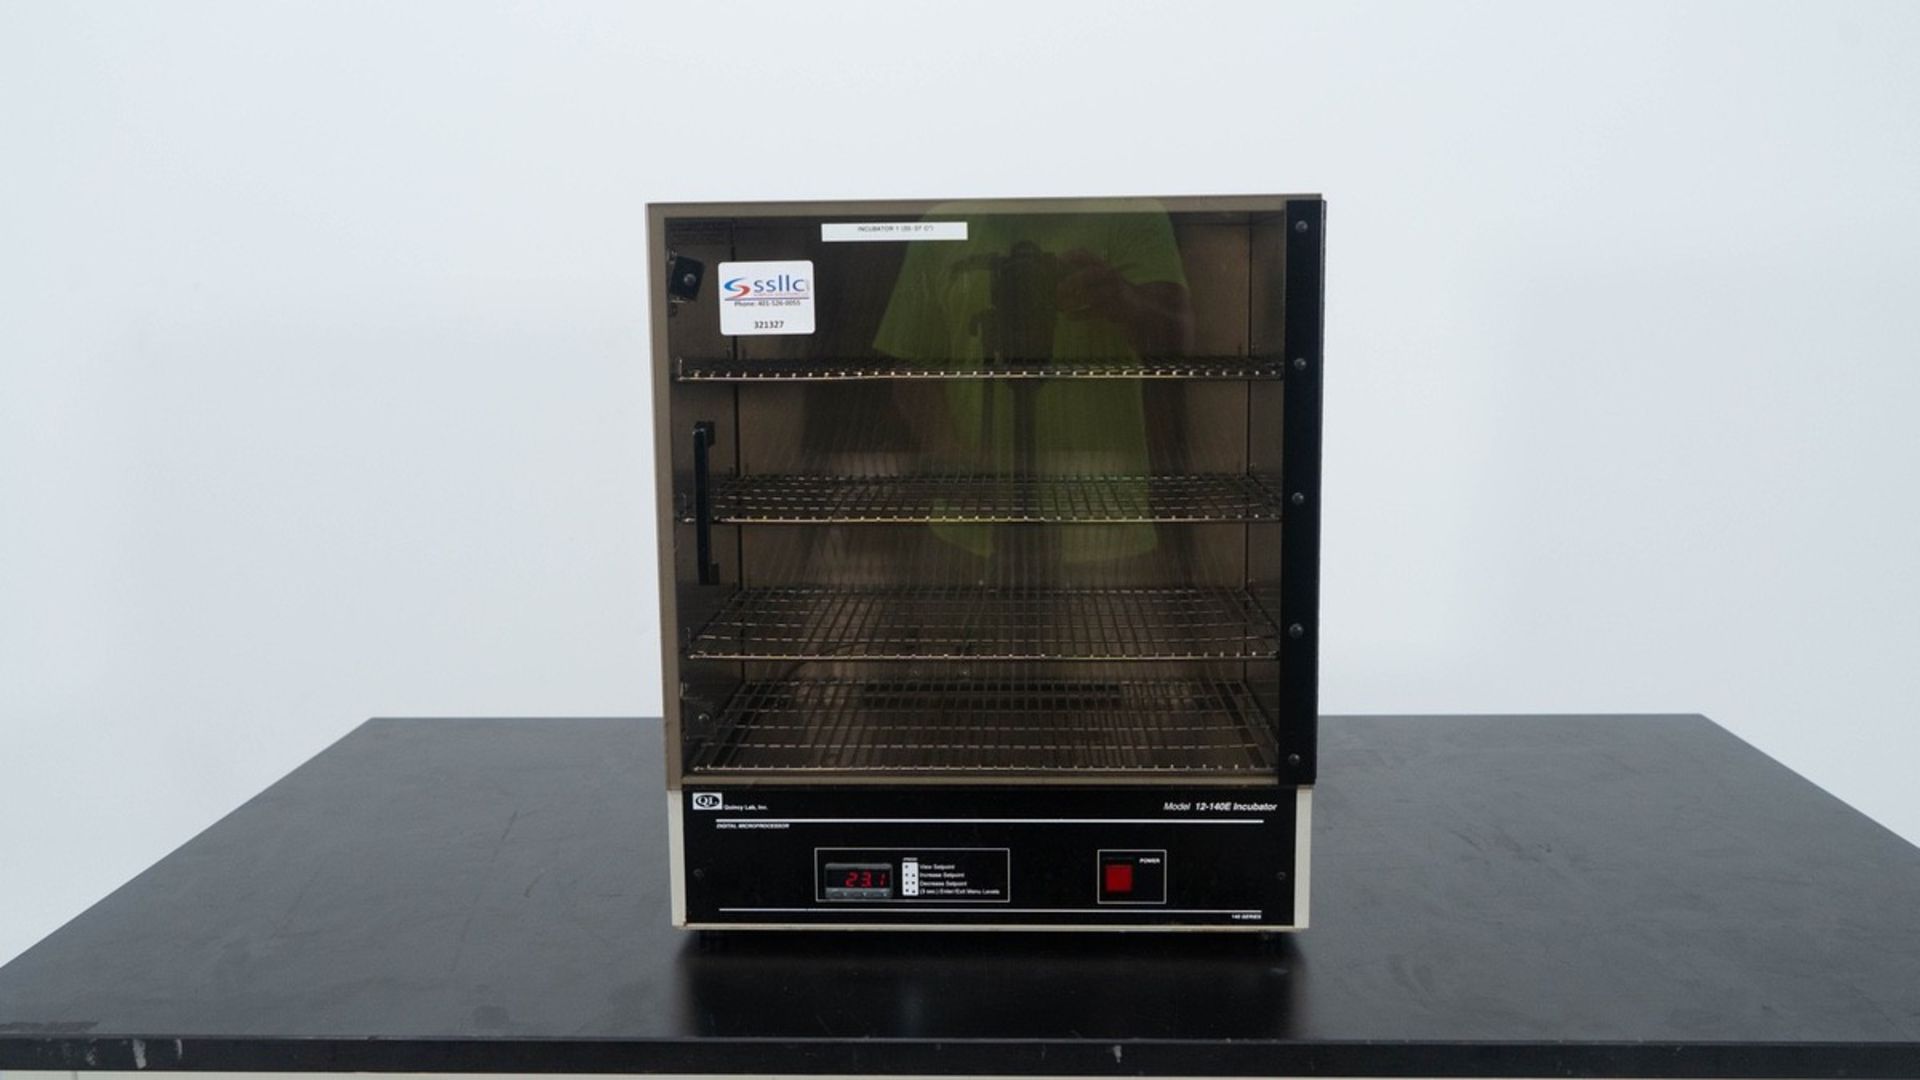 Quincy Lab 12-140E Benchtop Incubator, Model 12-140E, S/N: P-00676, Electrical: 115 | Rig Fee: $25